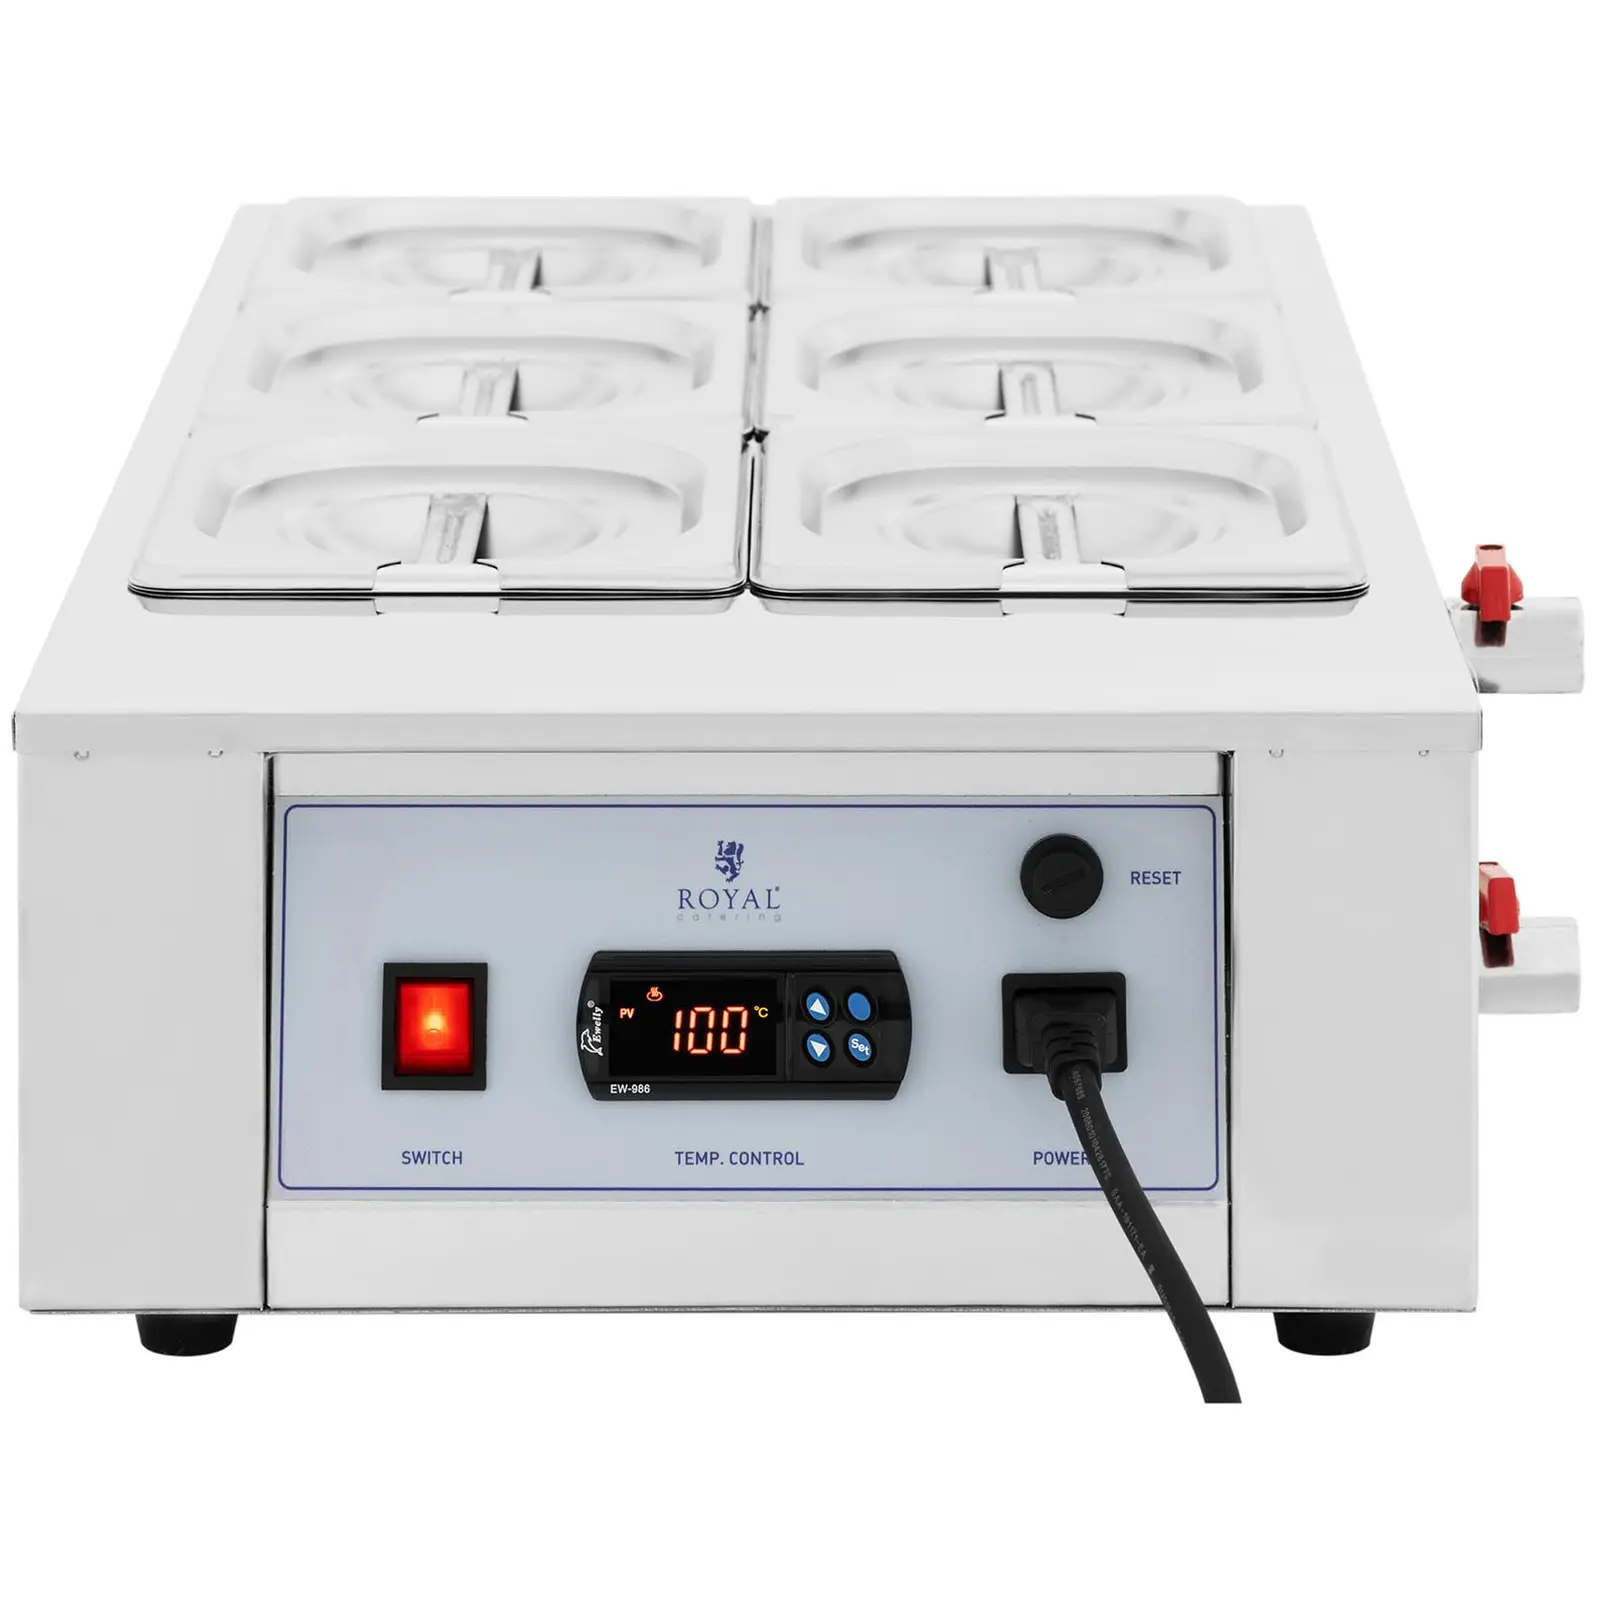 Factory second Chocolate Melter - 6 x 1,5 l - up to 100 °C - Royal Catering